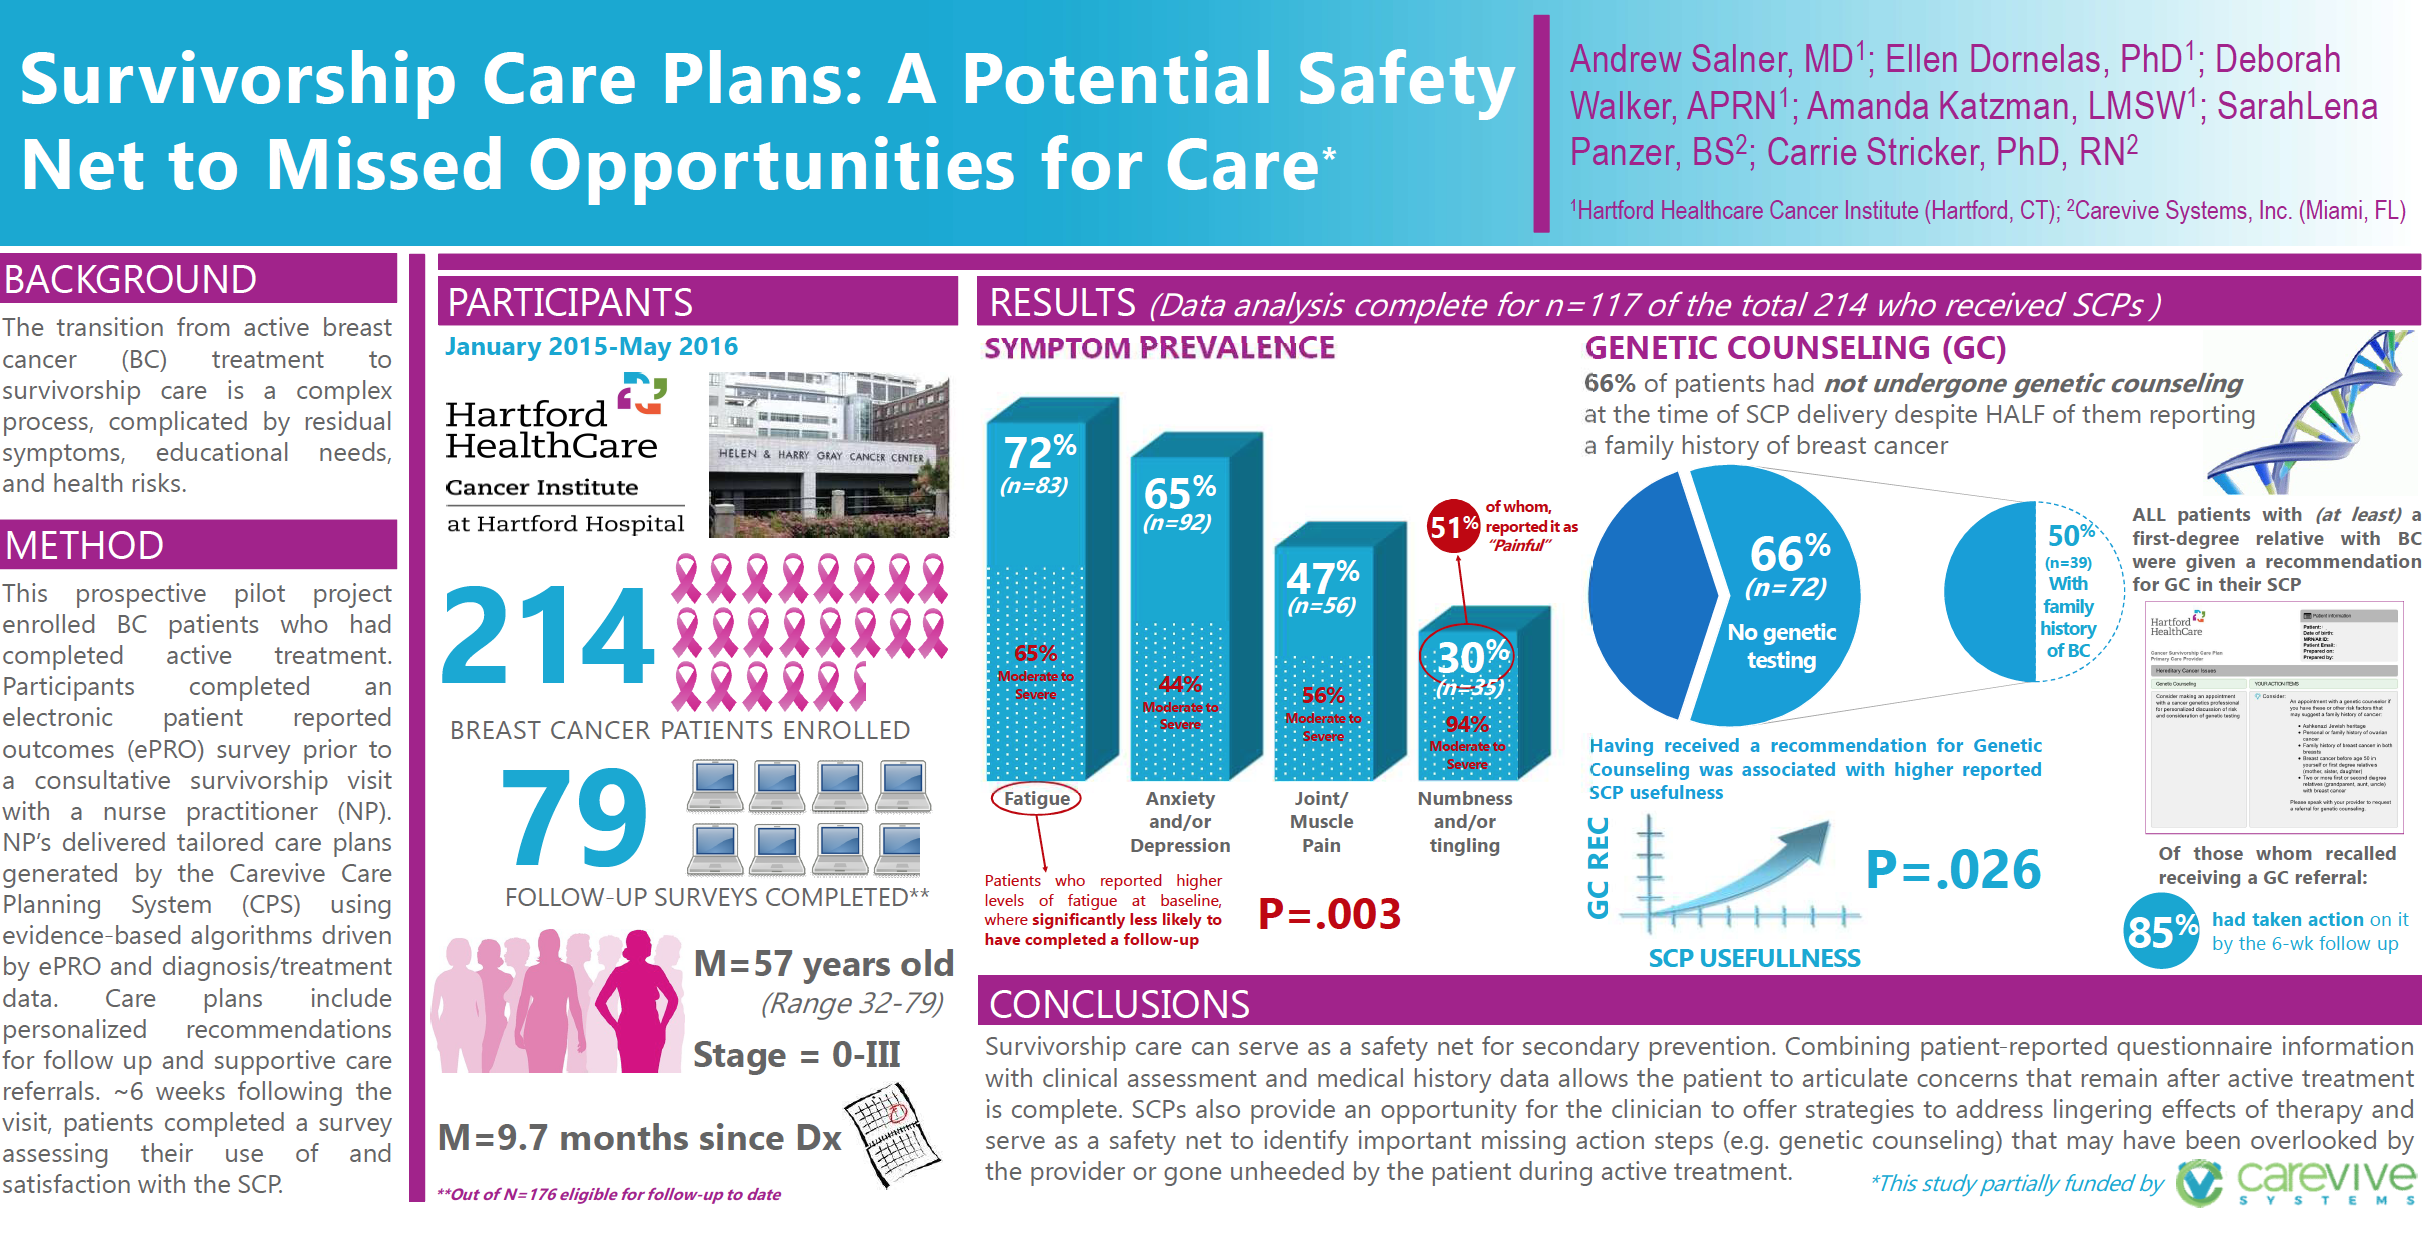 Survivorship Care Plans: A Potential Safety Net to Missed Opportunities for Care